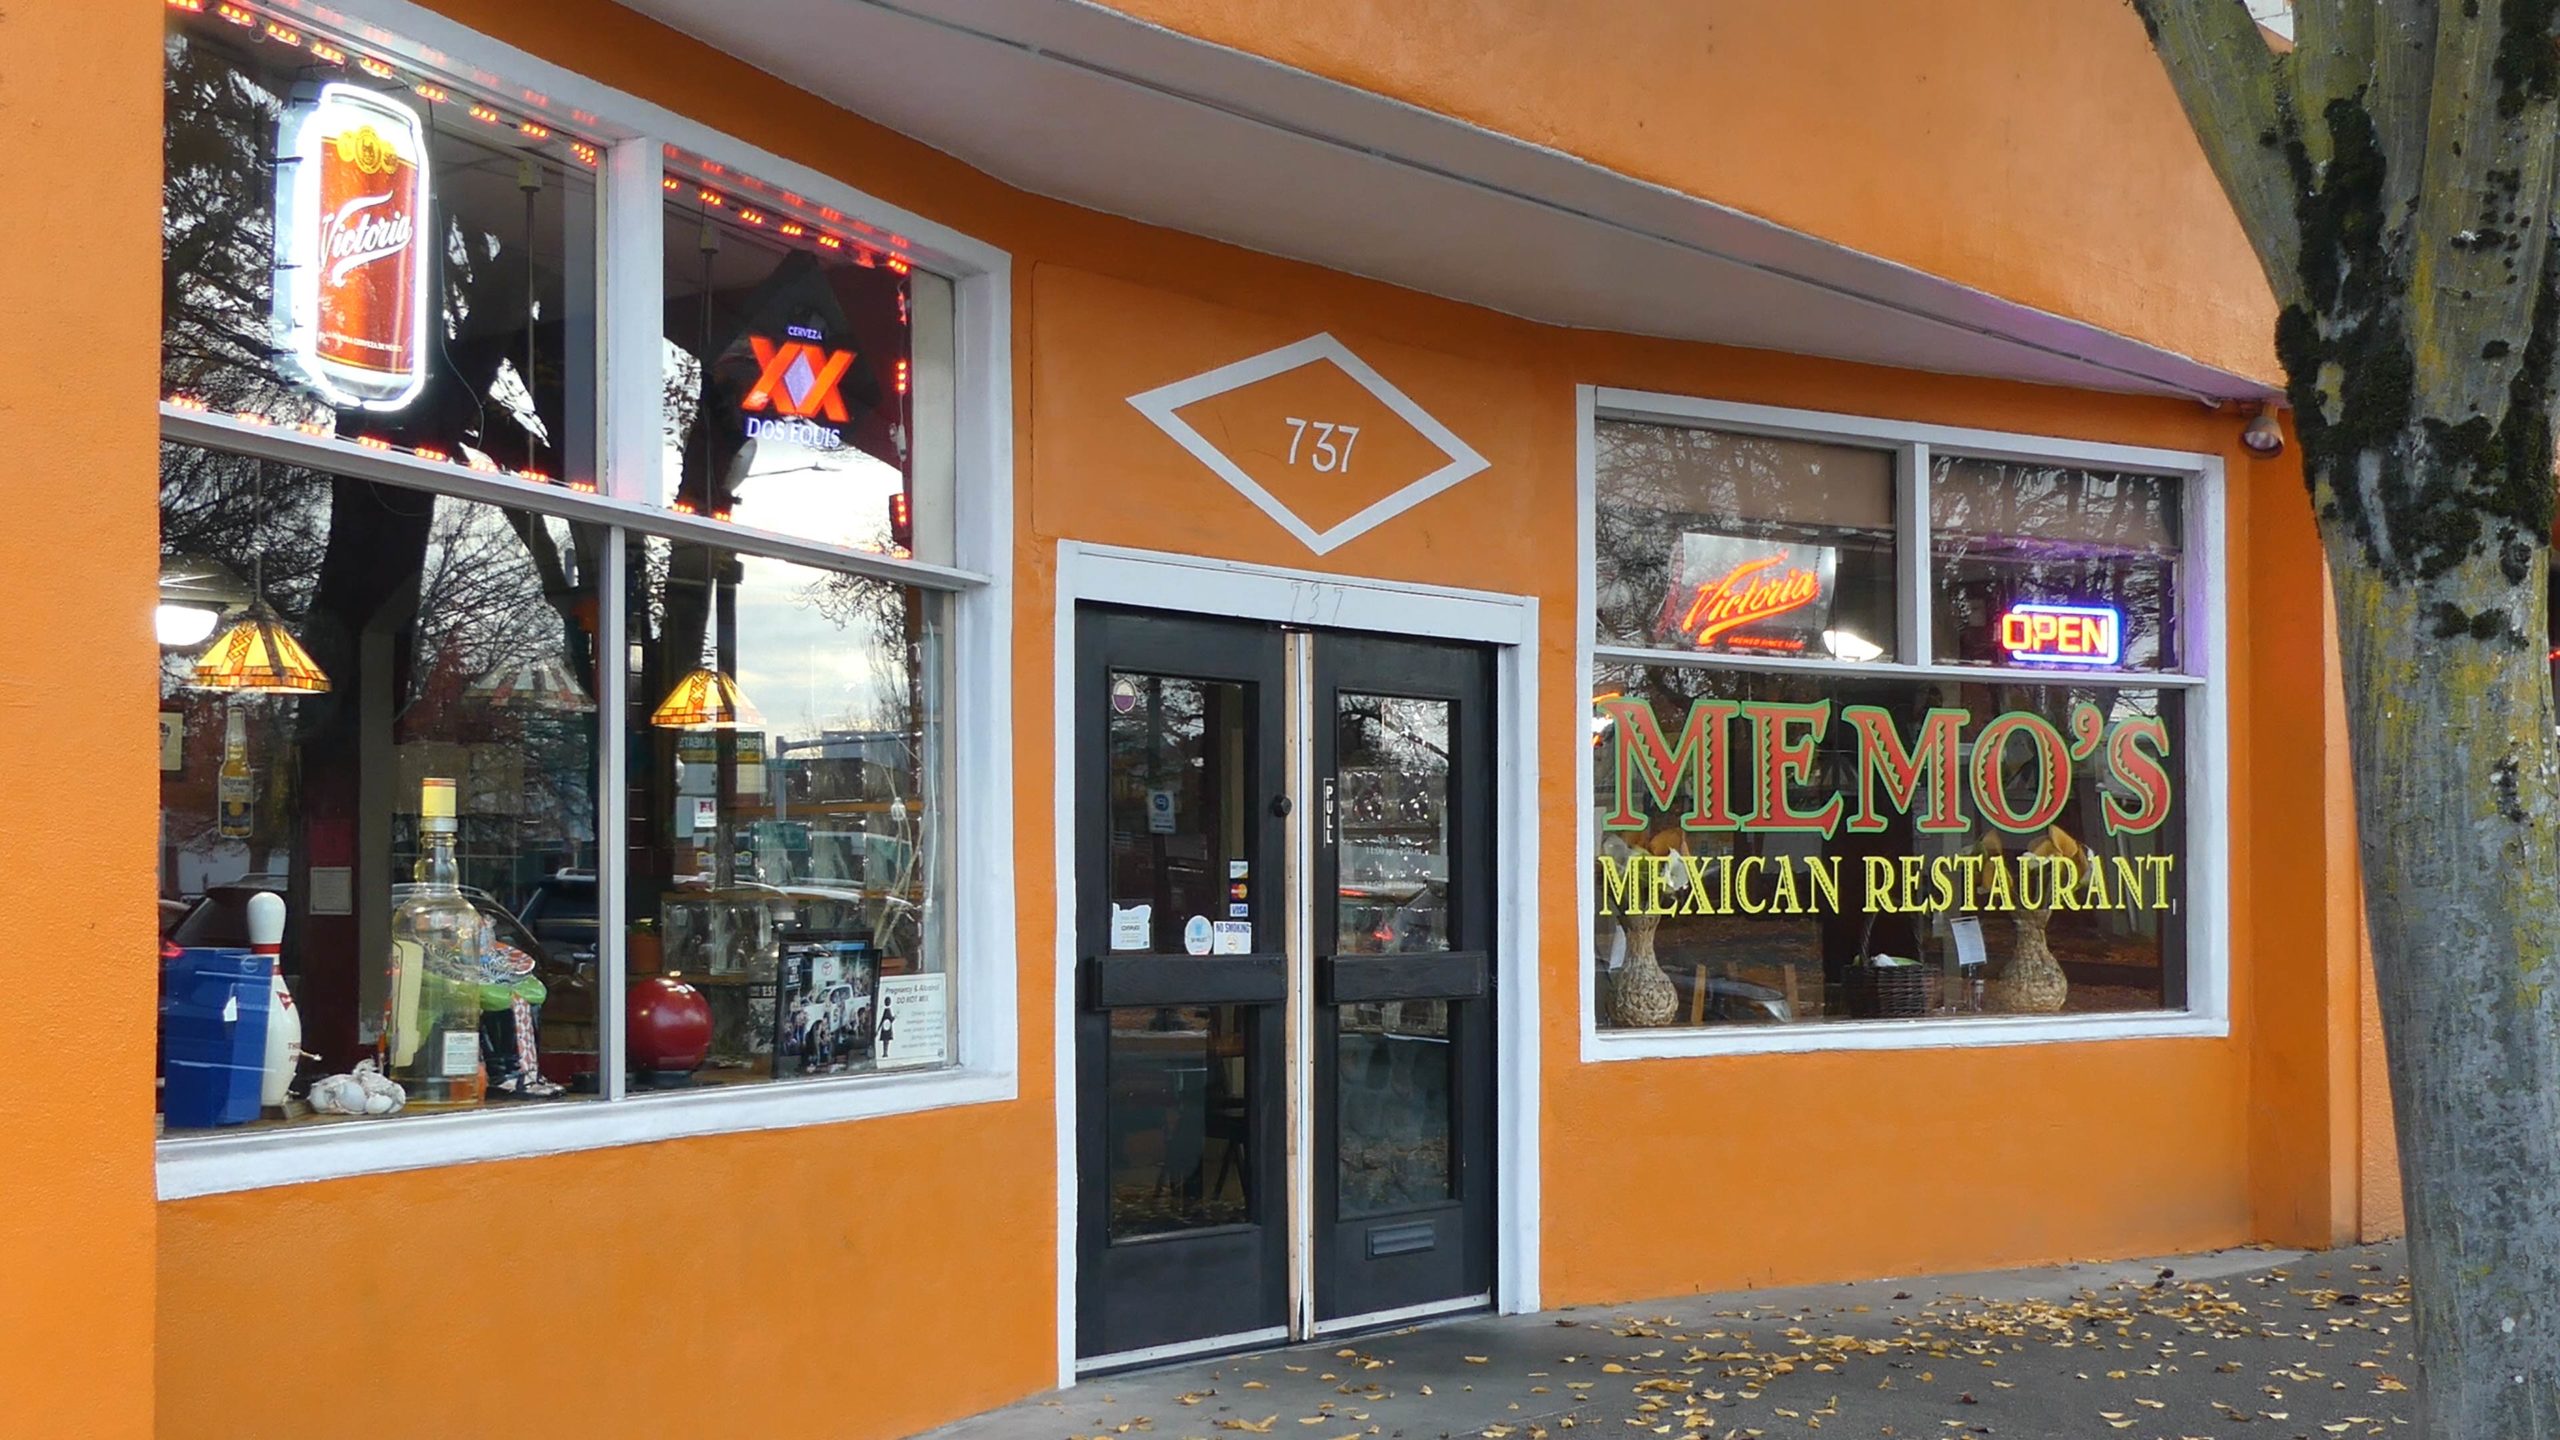 Memo's Mexican Restaurant Storefront